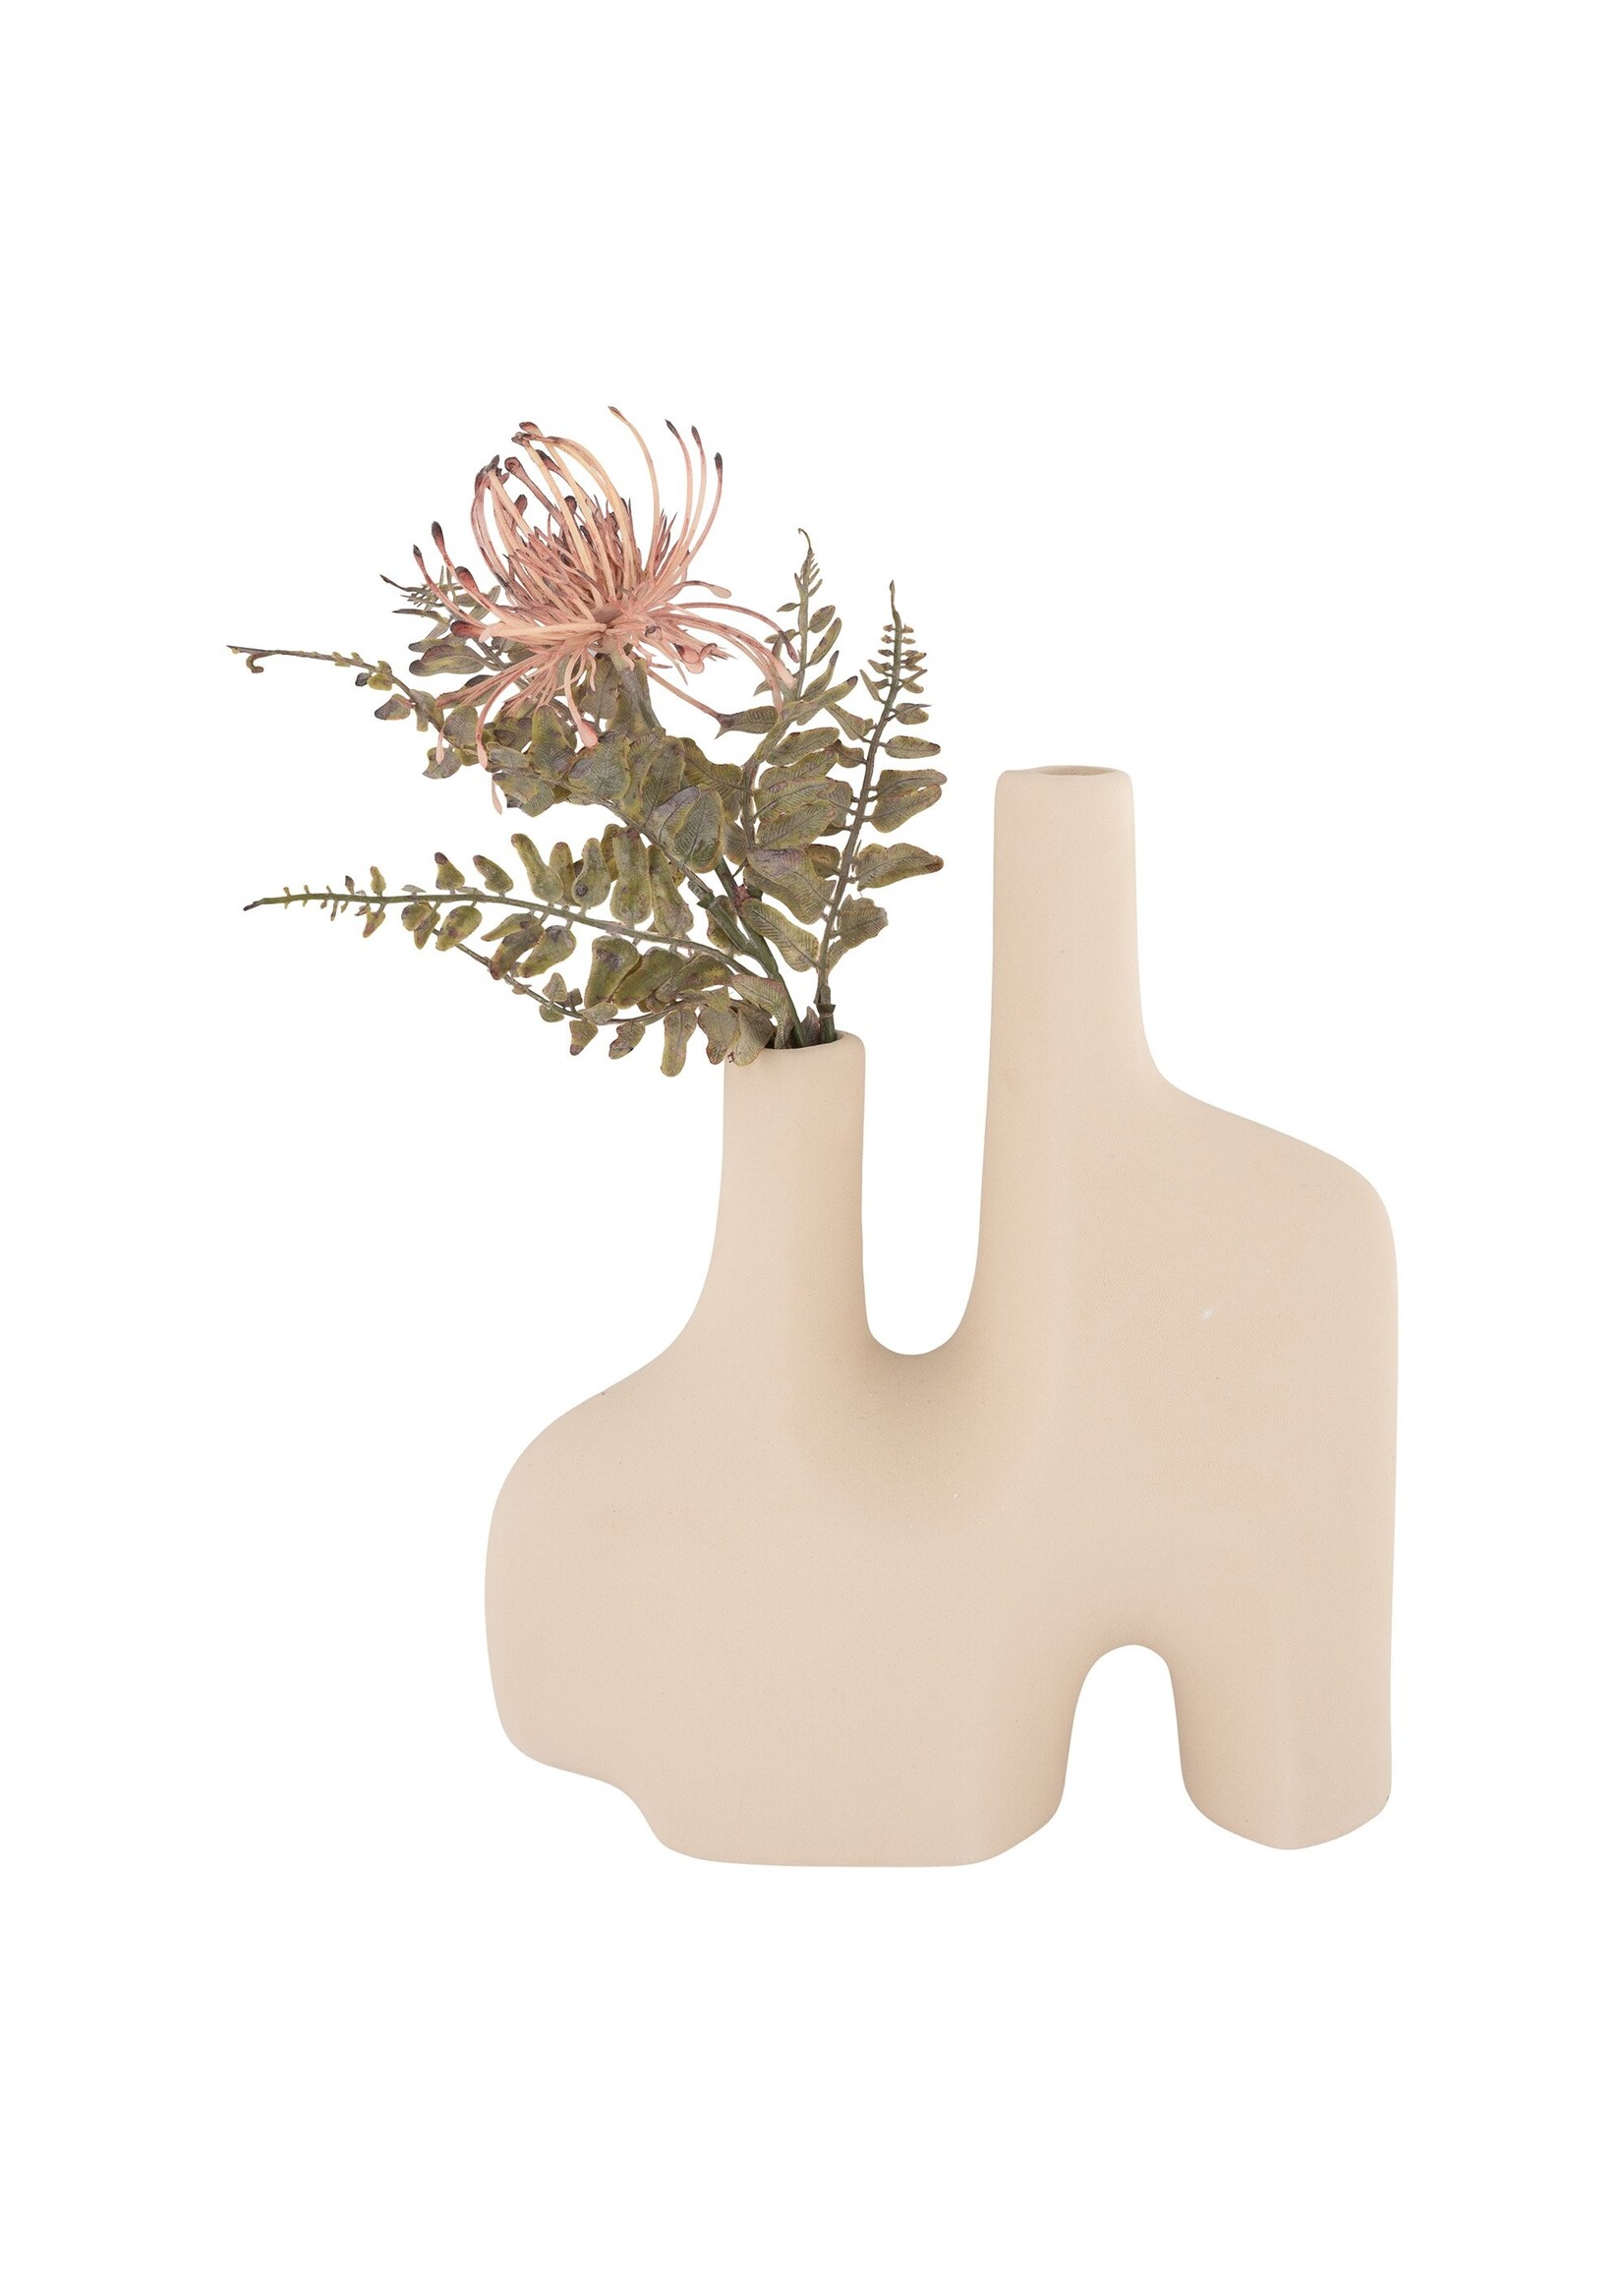 House Nordic Vaas - Vase in ceramic, sand, organic shape with two openings, 23,5x8x27 cm